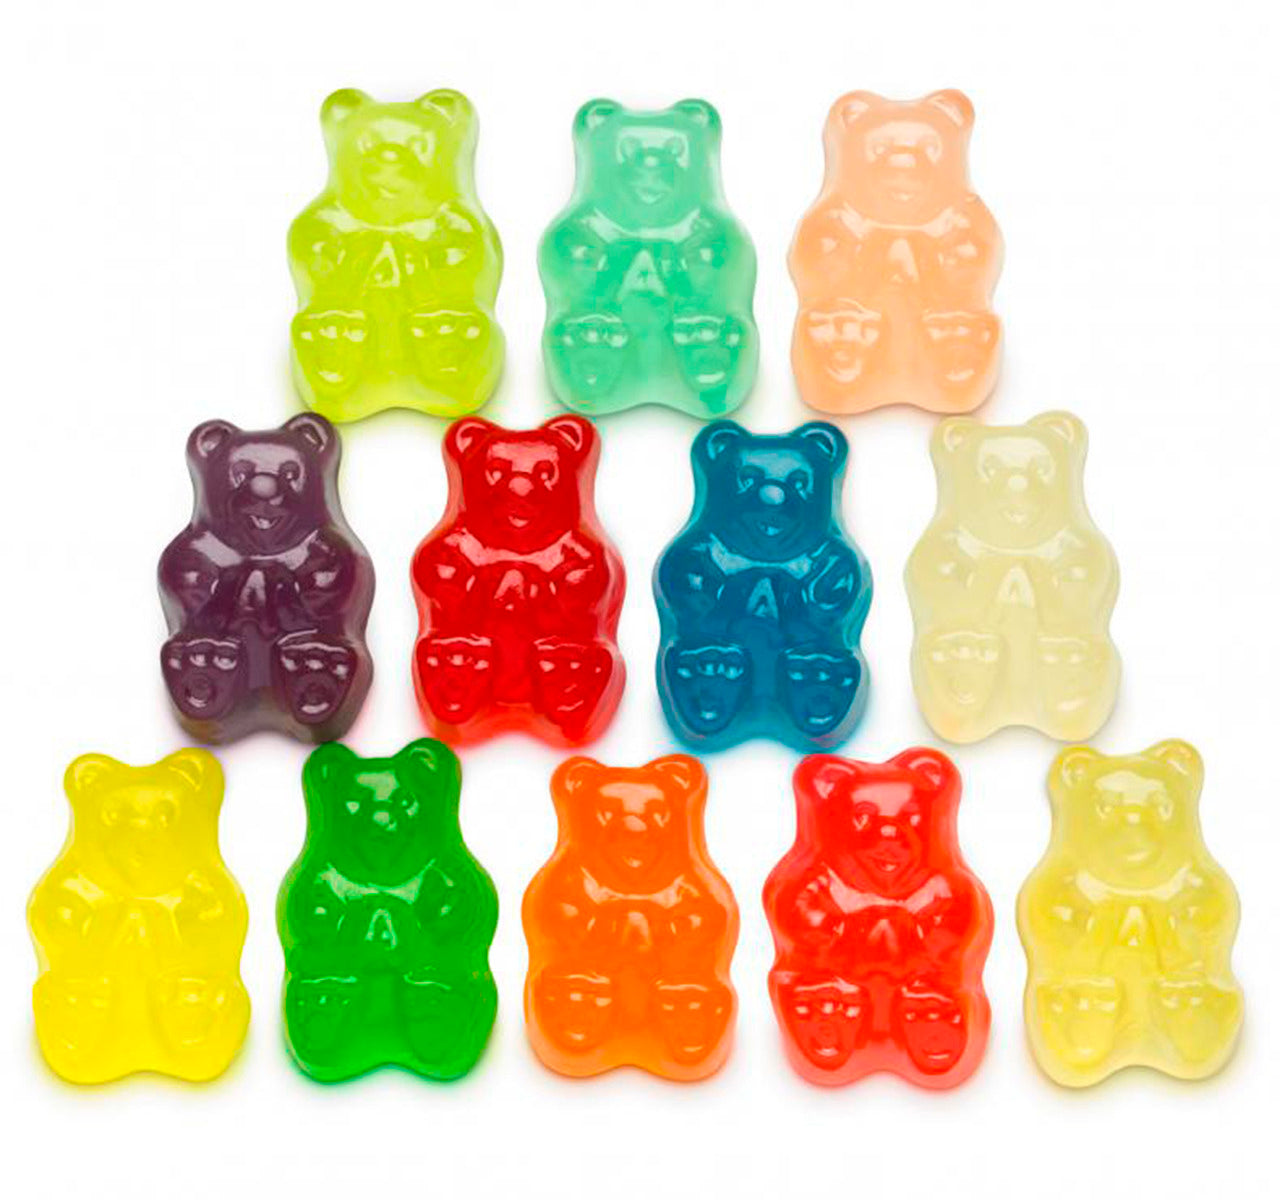 12 Assorted flavor gummy bears 1 lb package